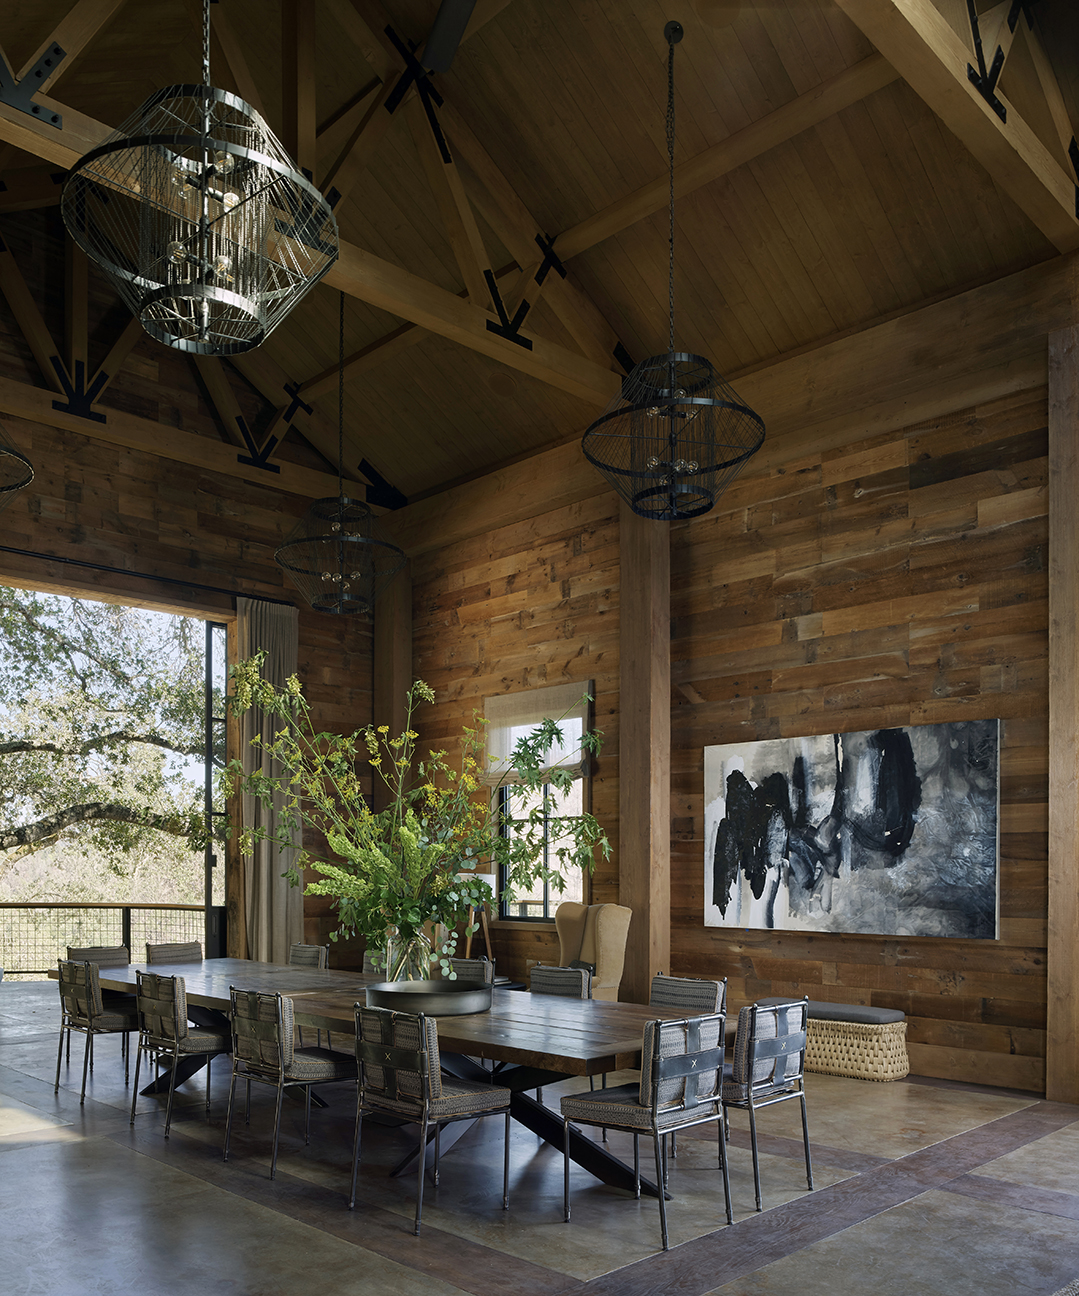 Jennifer-Robin-Interiors-Projects-Party-Barn-2-Dining-Area